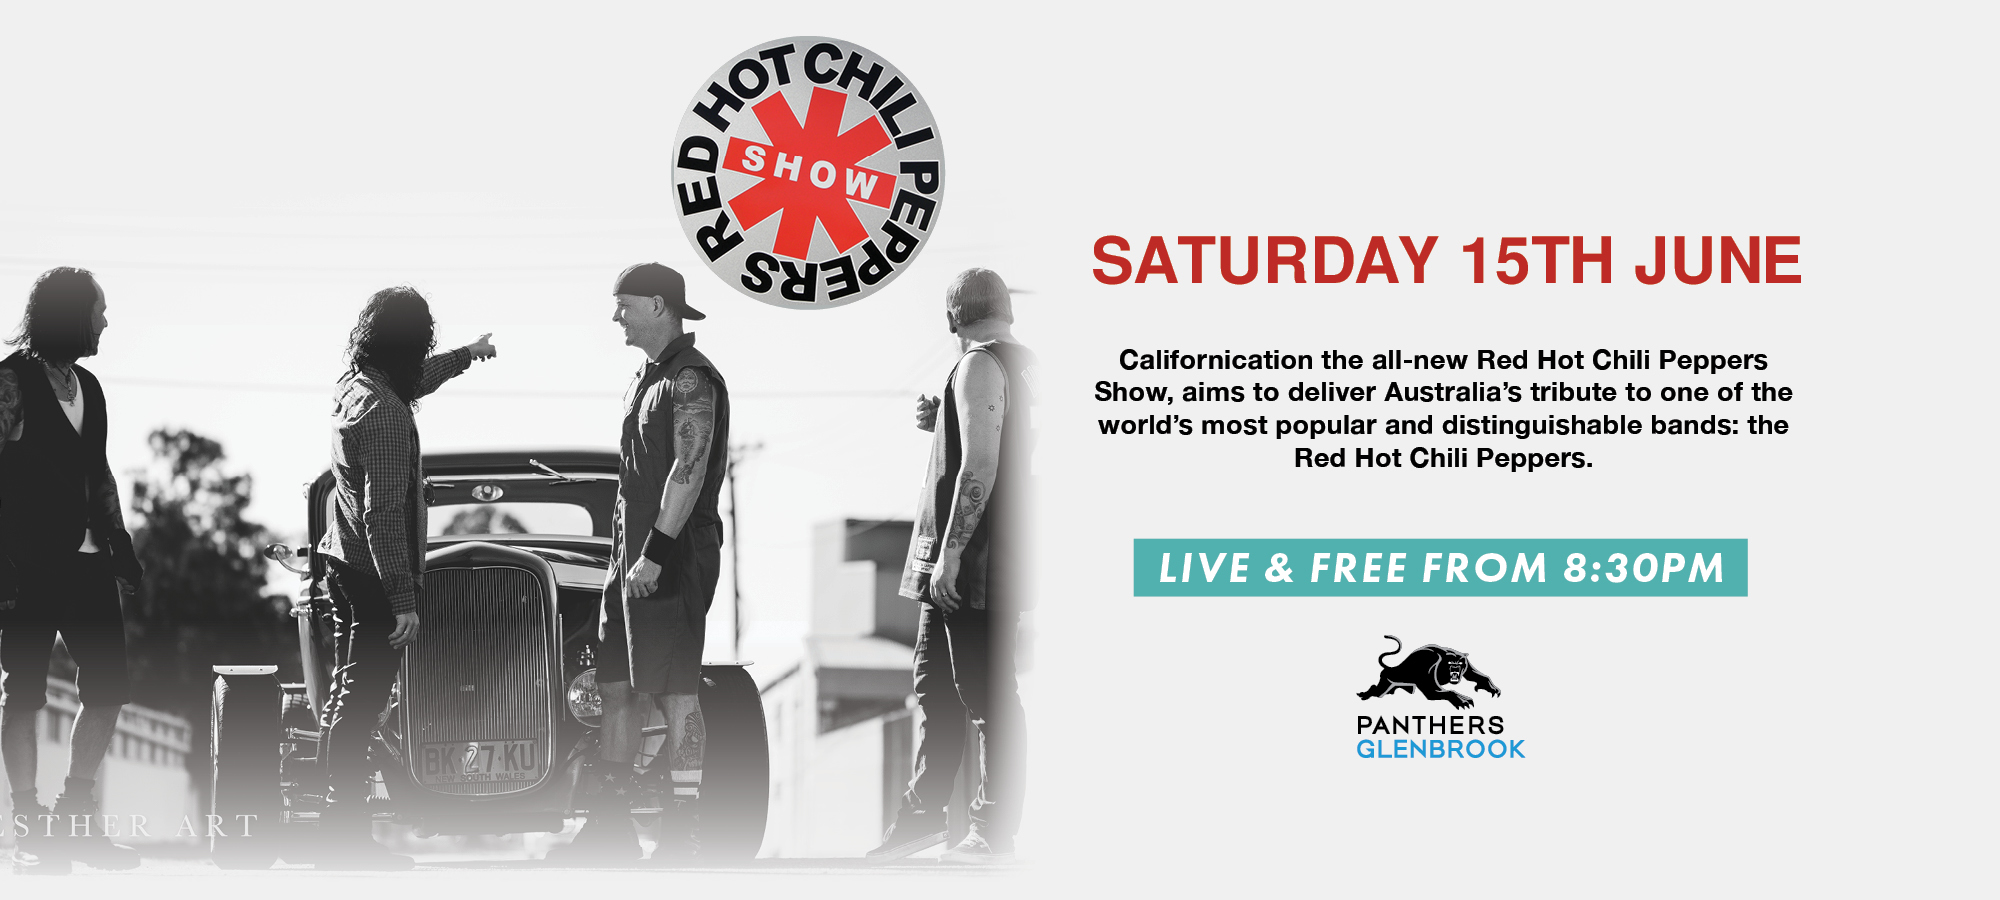 Chilli Peppers – Saturday Live Entertainment in June